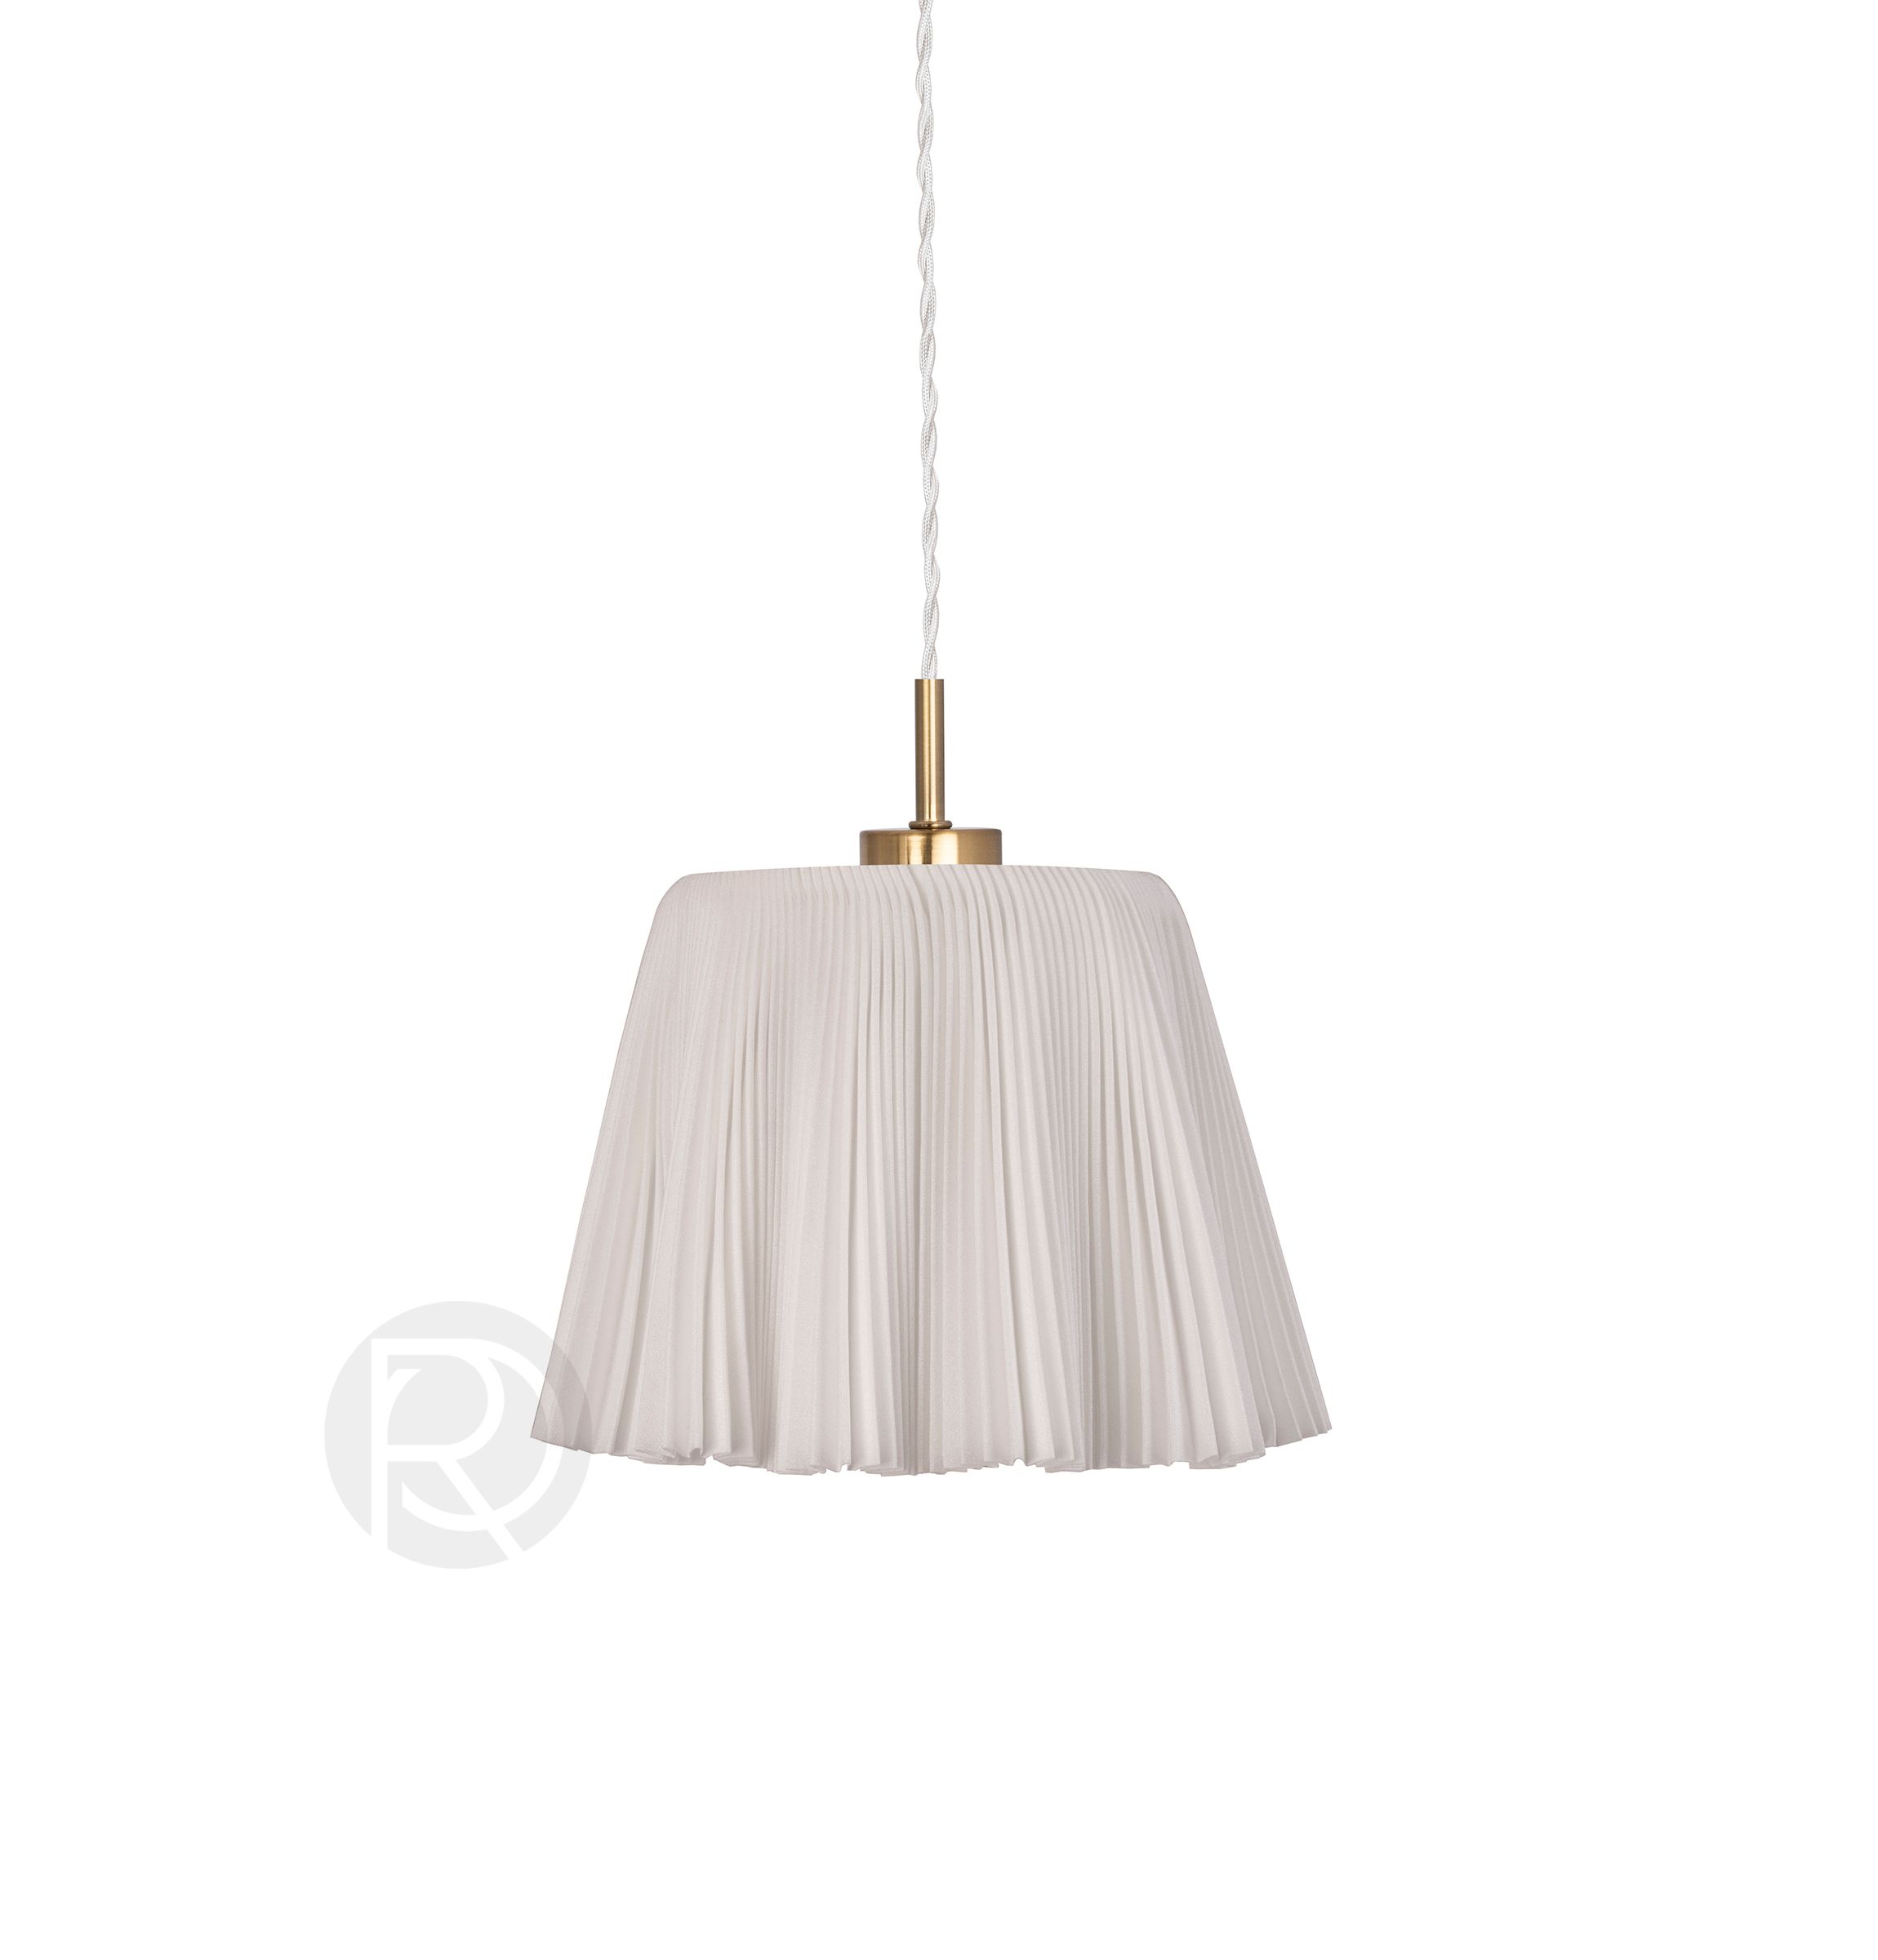 Hanging lamp EDITH by Globen